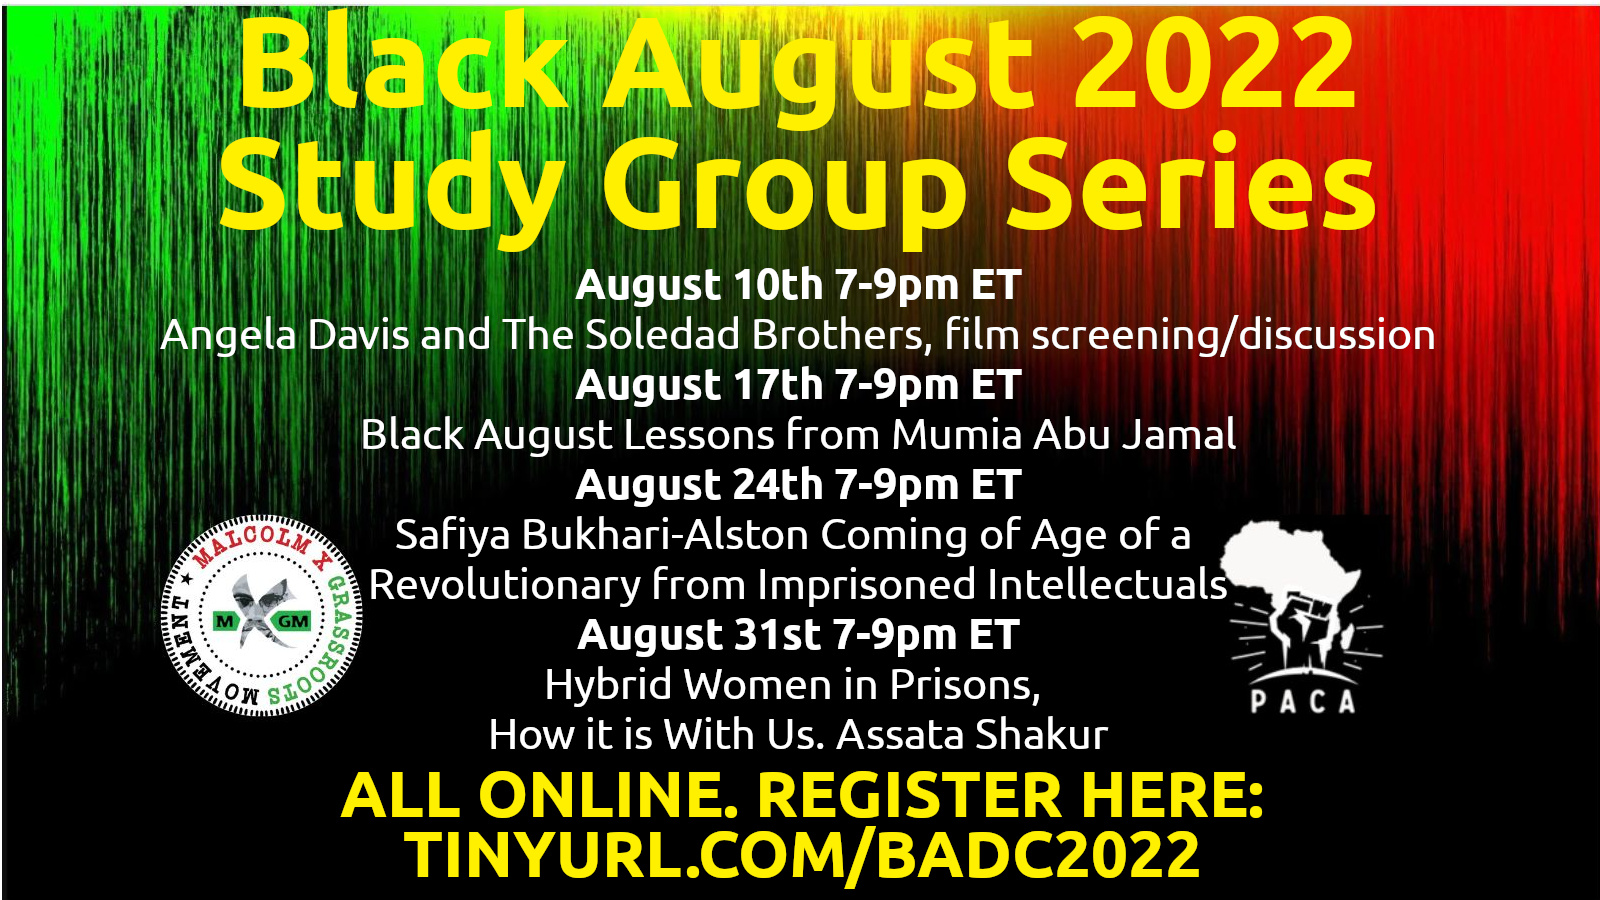 Black August 2022 Study Group Series by PACA and Malcolm X Grassroots Movement